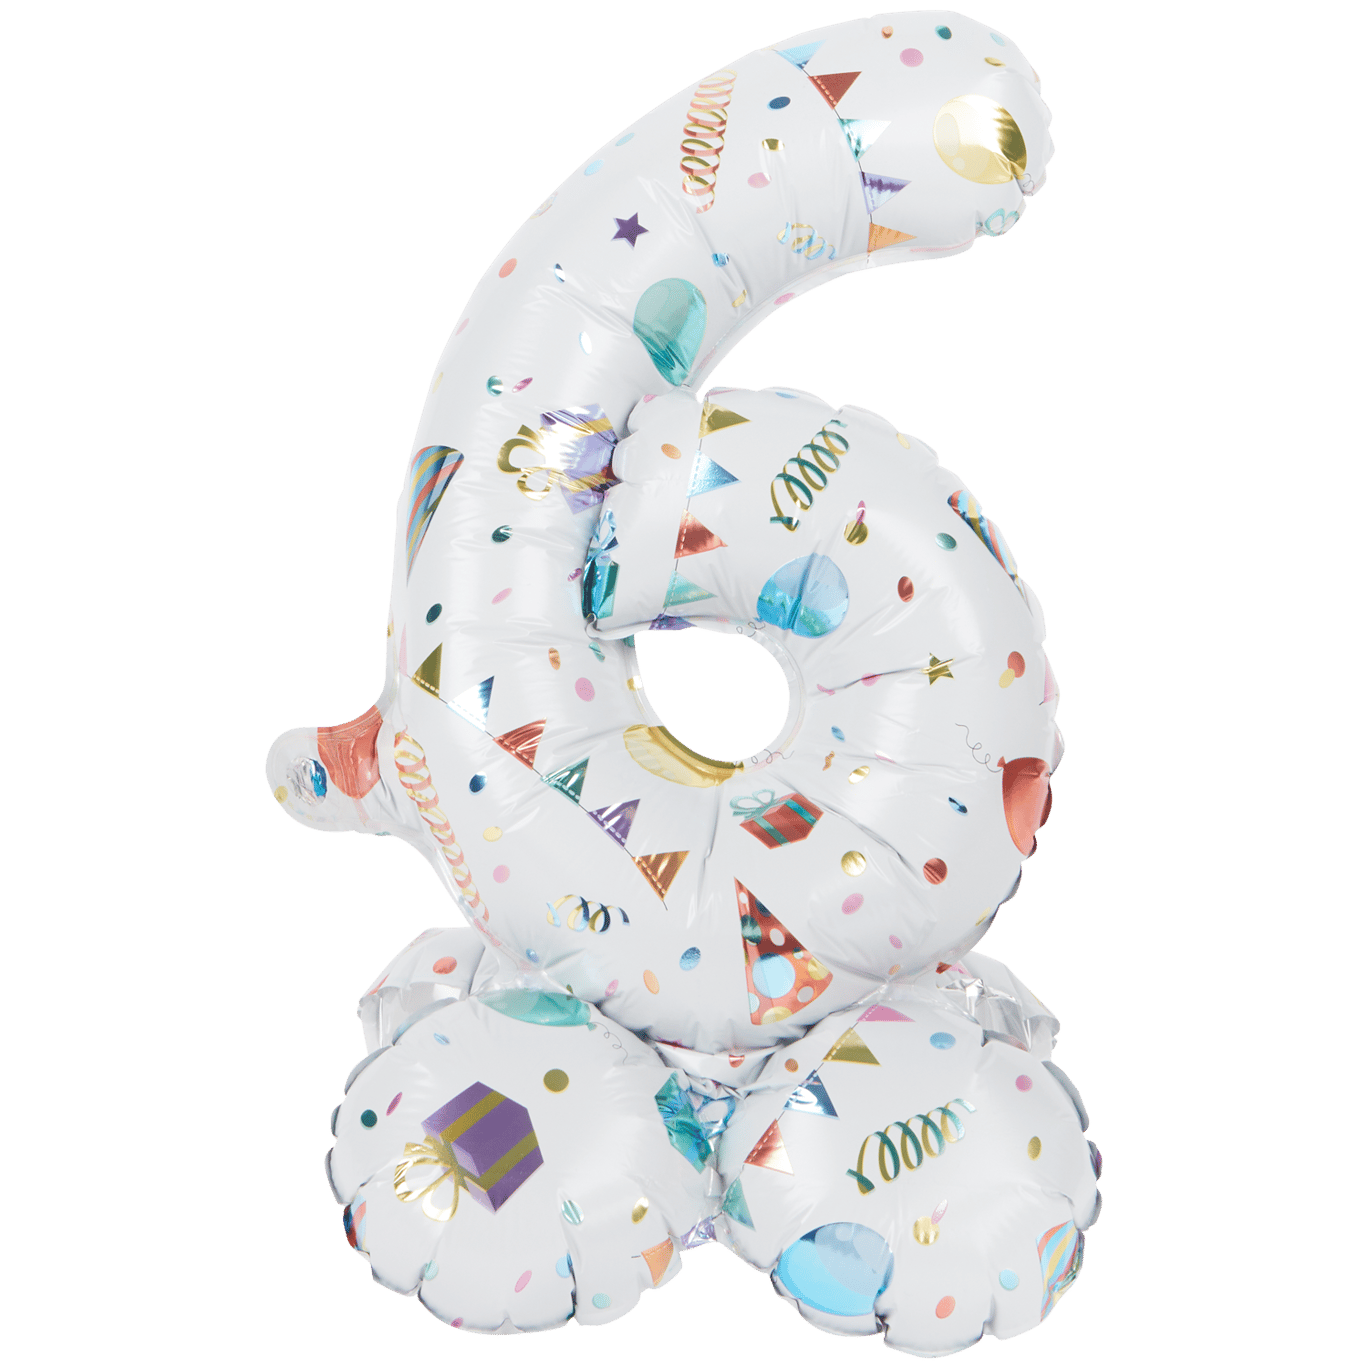 Relaxdays - Relaxdays Ballon chiffre numéro 25 gonflable